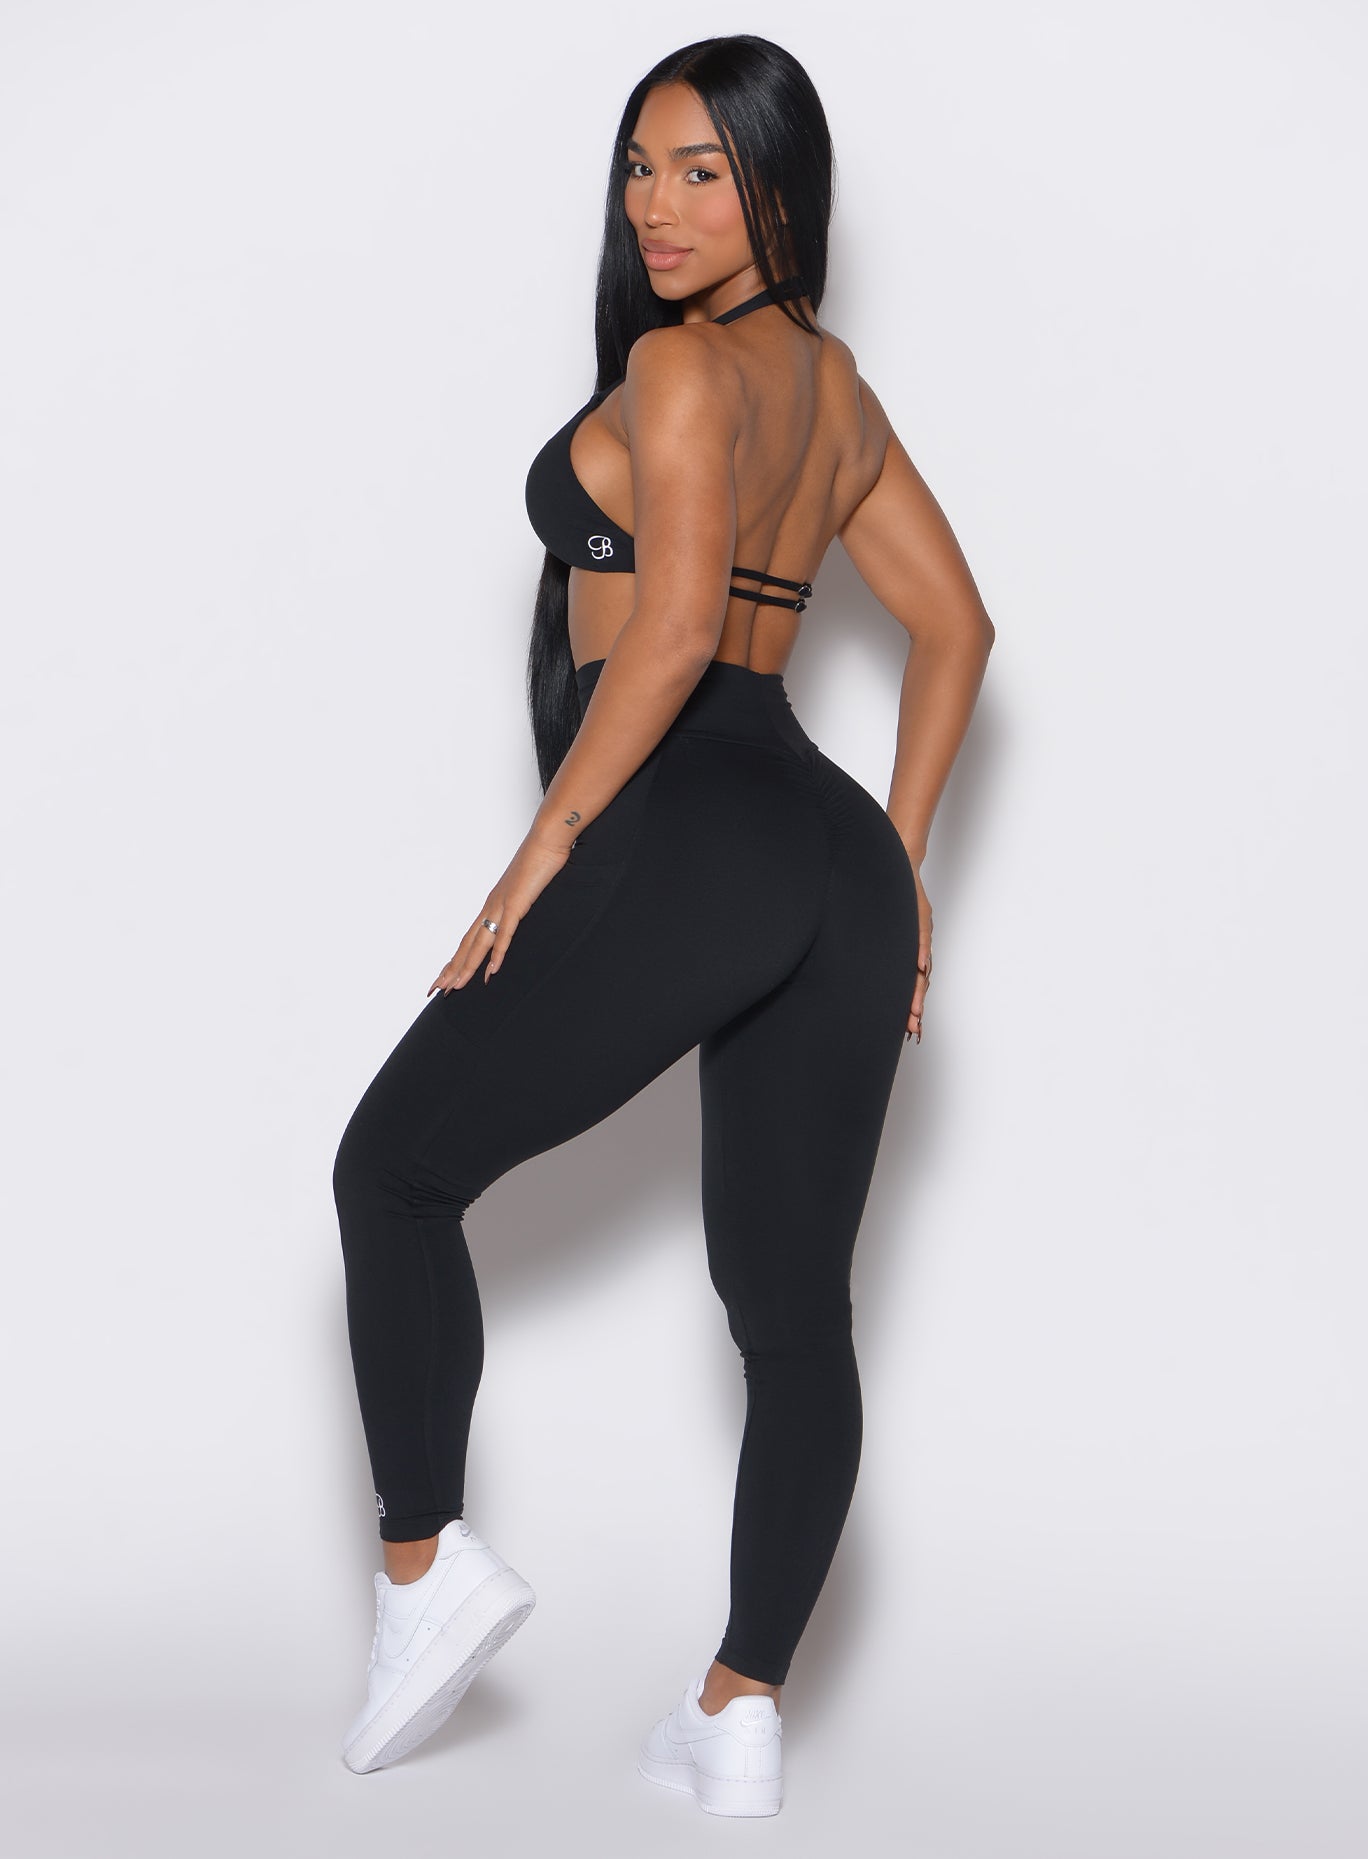 Left side profile picture of a model facing to her left wearing our black curves leggings along with a matching sports bra 